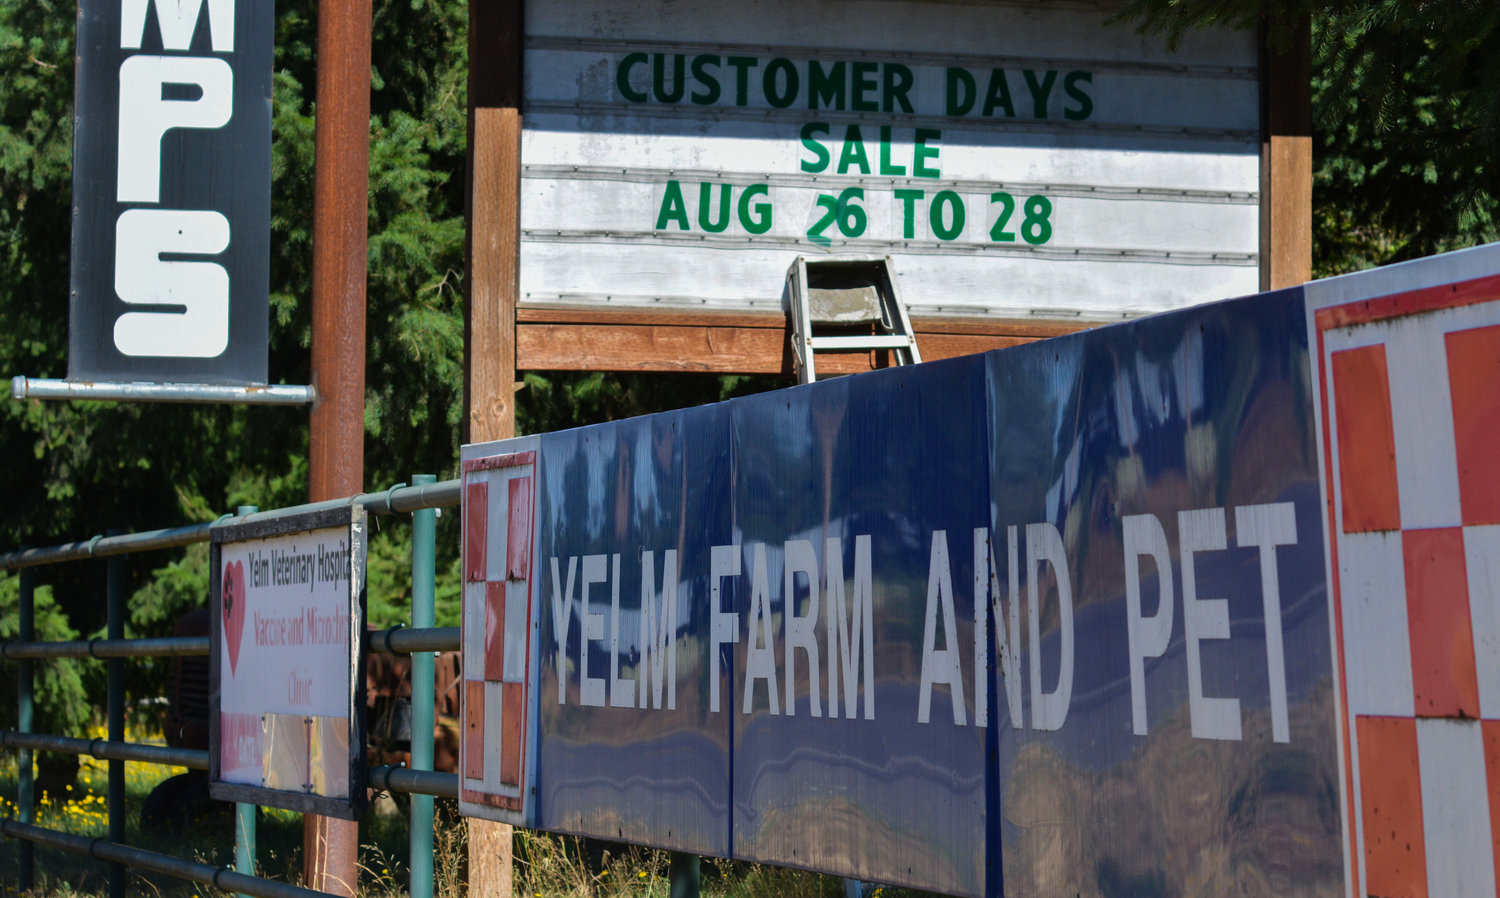 Yelm Farm and Pet’s annual customer appreciation sale has occured for over 10 years.